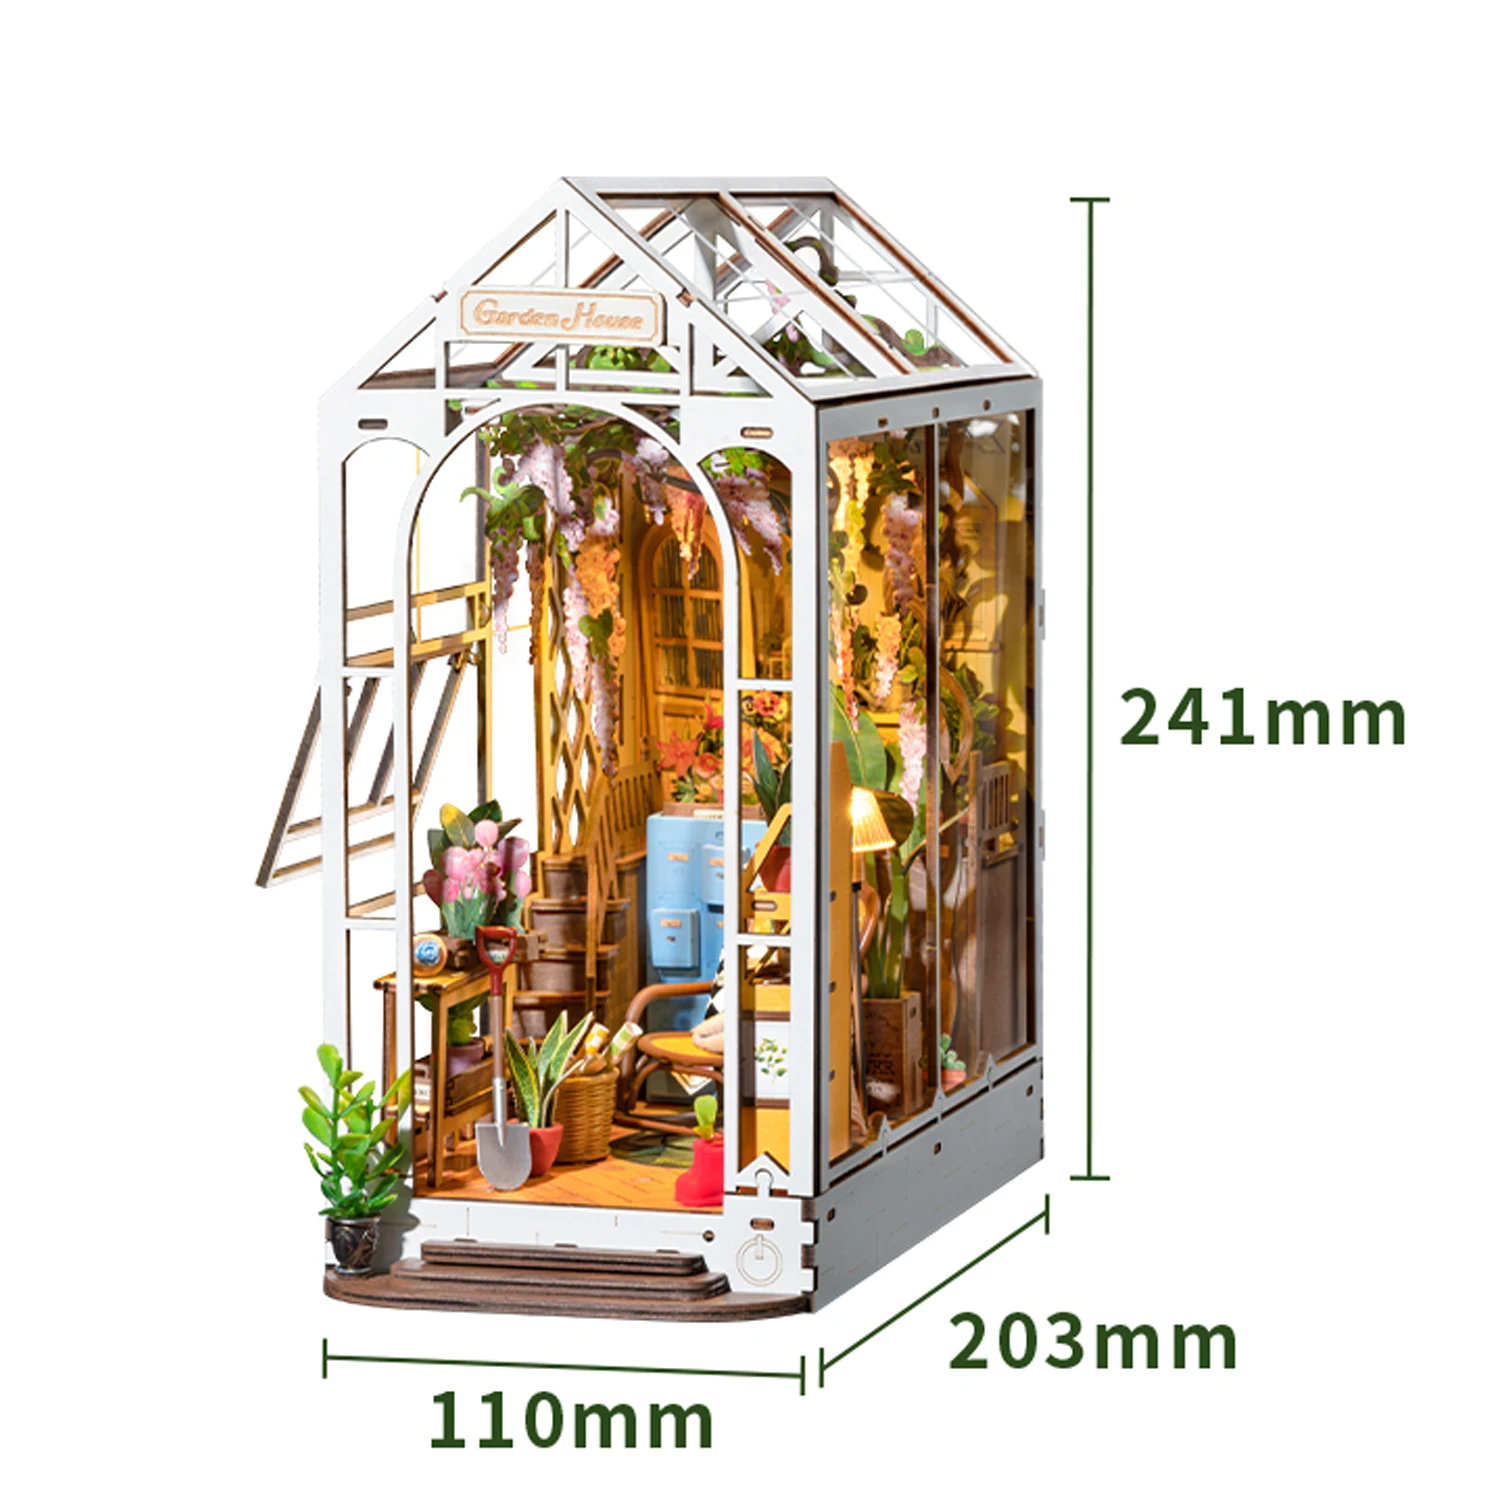 Robotime Rolife Diy Book Nook Gardenhouse With Lights Easy Assemble Amazing  Gift For Child Tgb06 - Puzzles - AliExpress